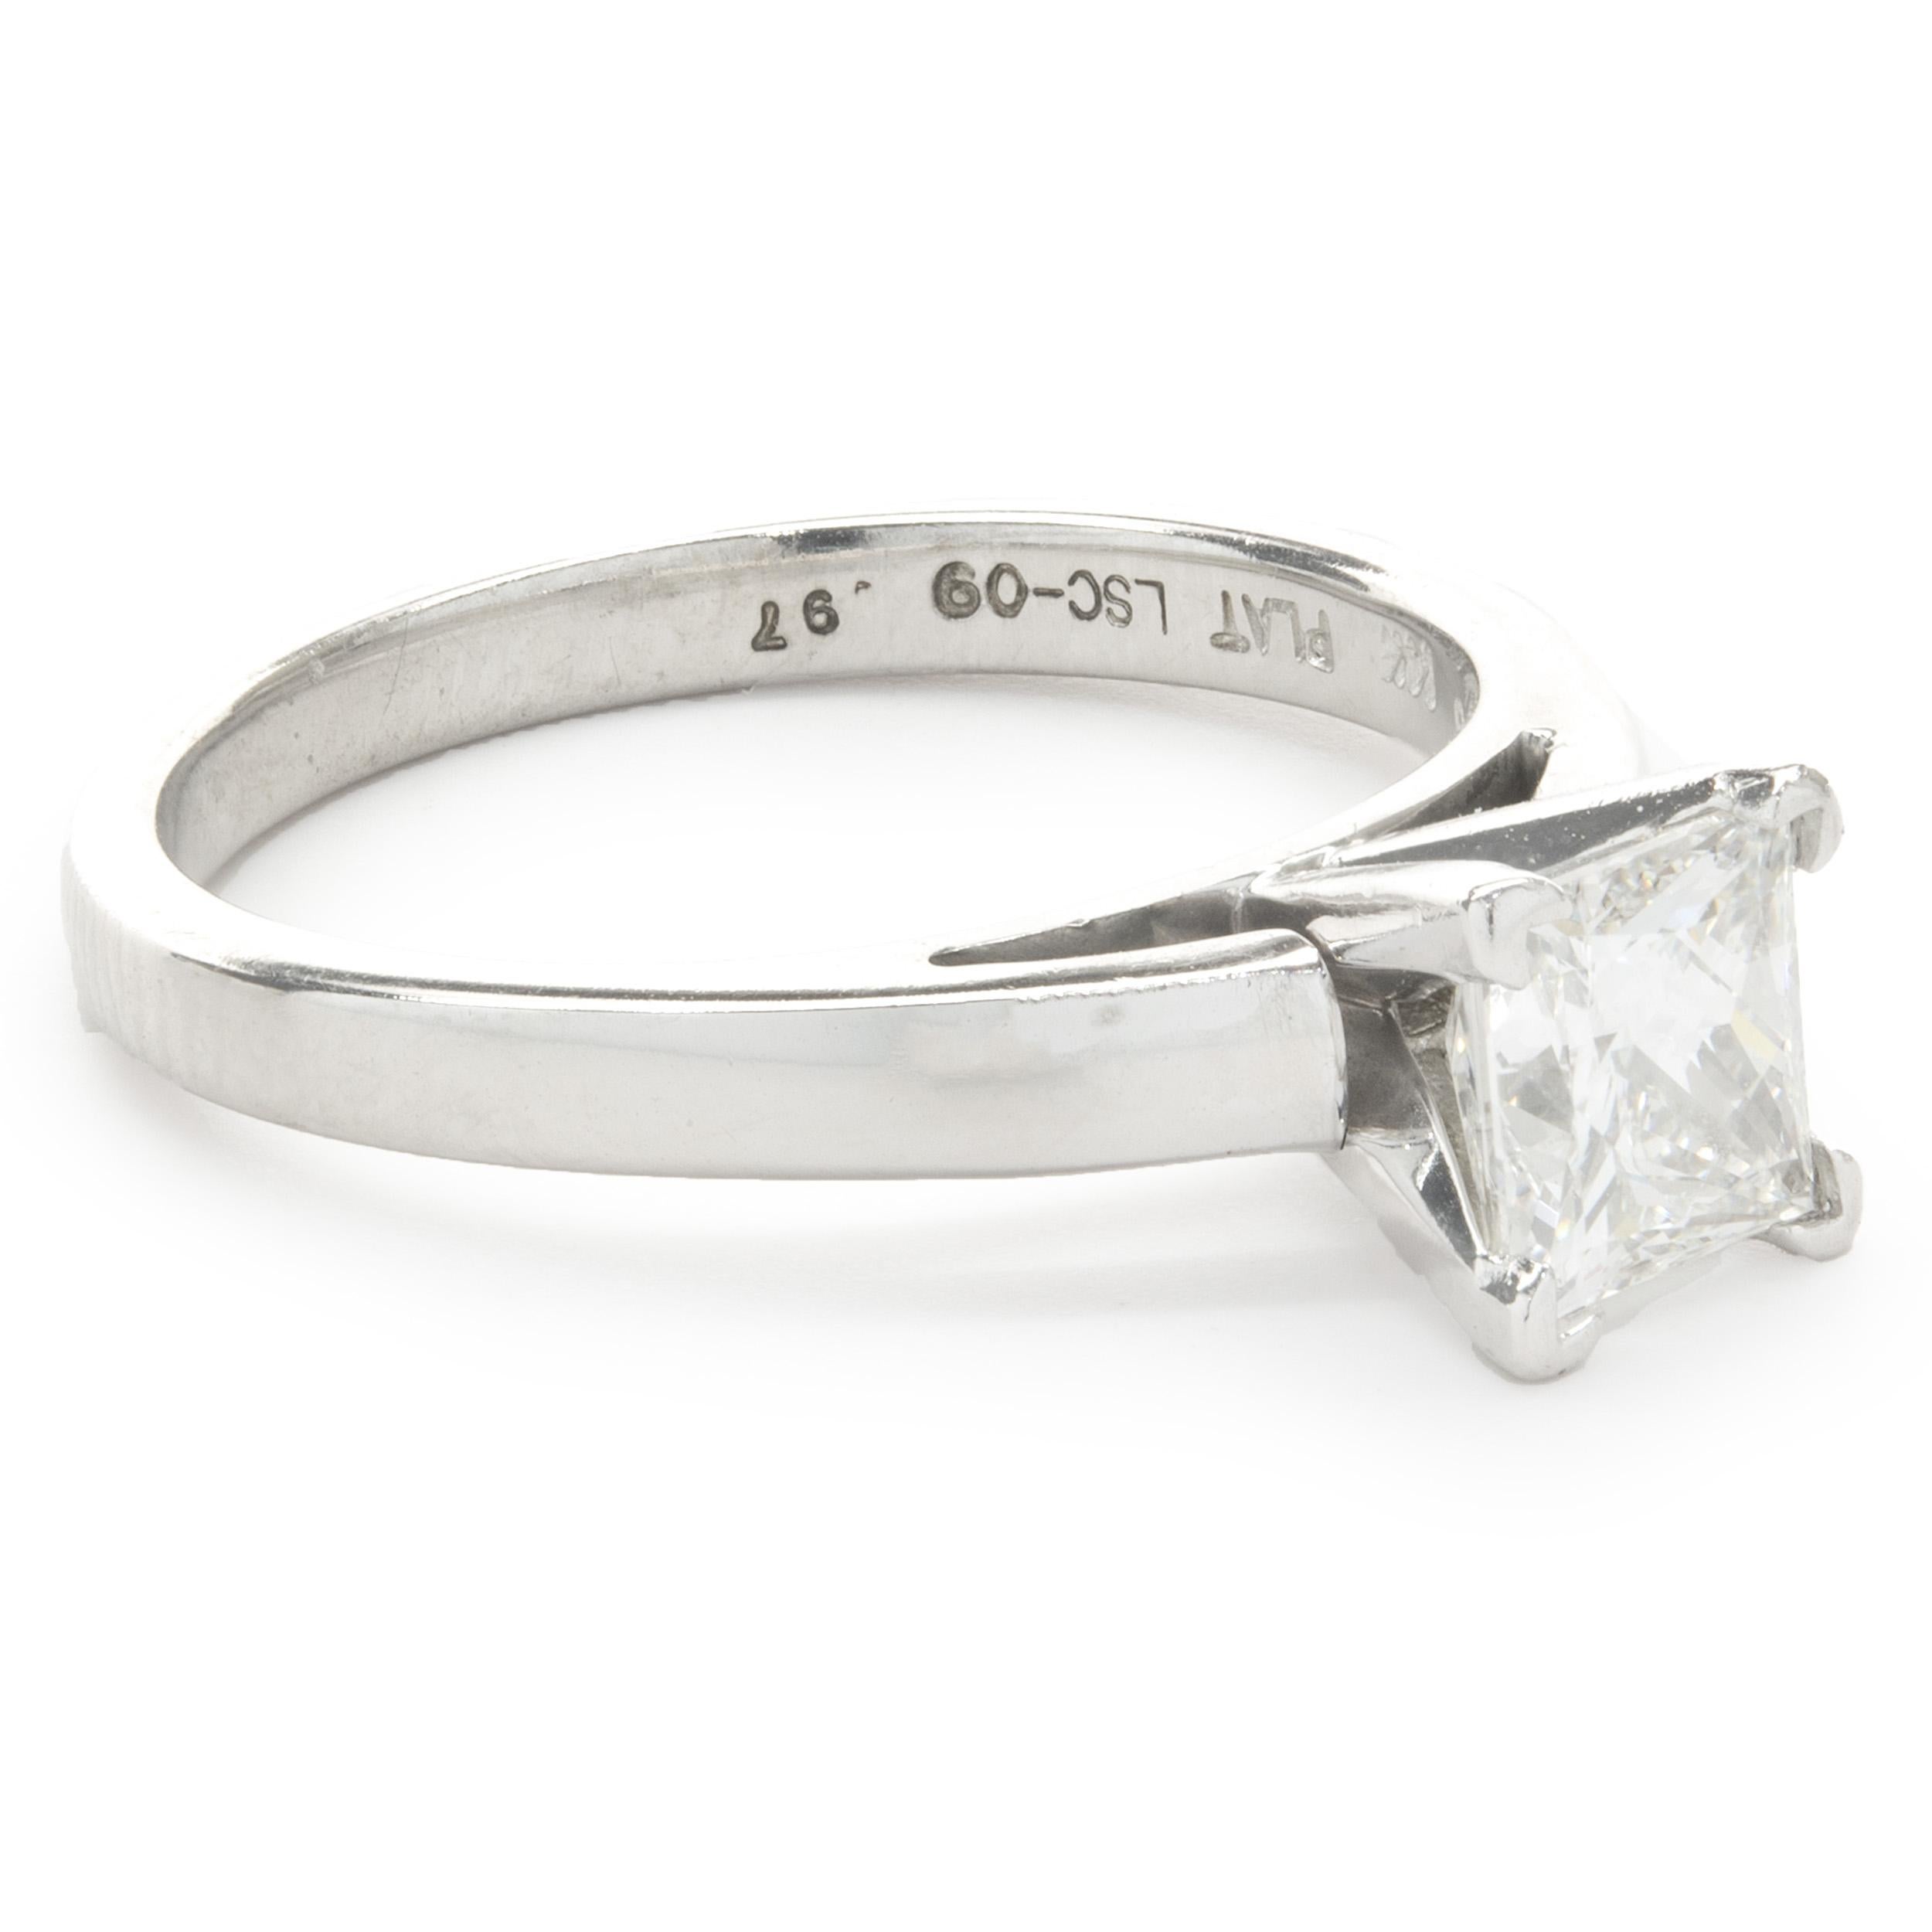 Designer: custom
Material: platinum
Diamond: 1 princess cut = 0.97ct
Color: G
Clarity: SI1
GSI Certification: 107736S
Ring Size: 7 (please allow two additional shipping days for sizing requests)
Dimensions: ring top measures 5.7mm 
Weight: 4.23 grams